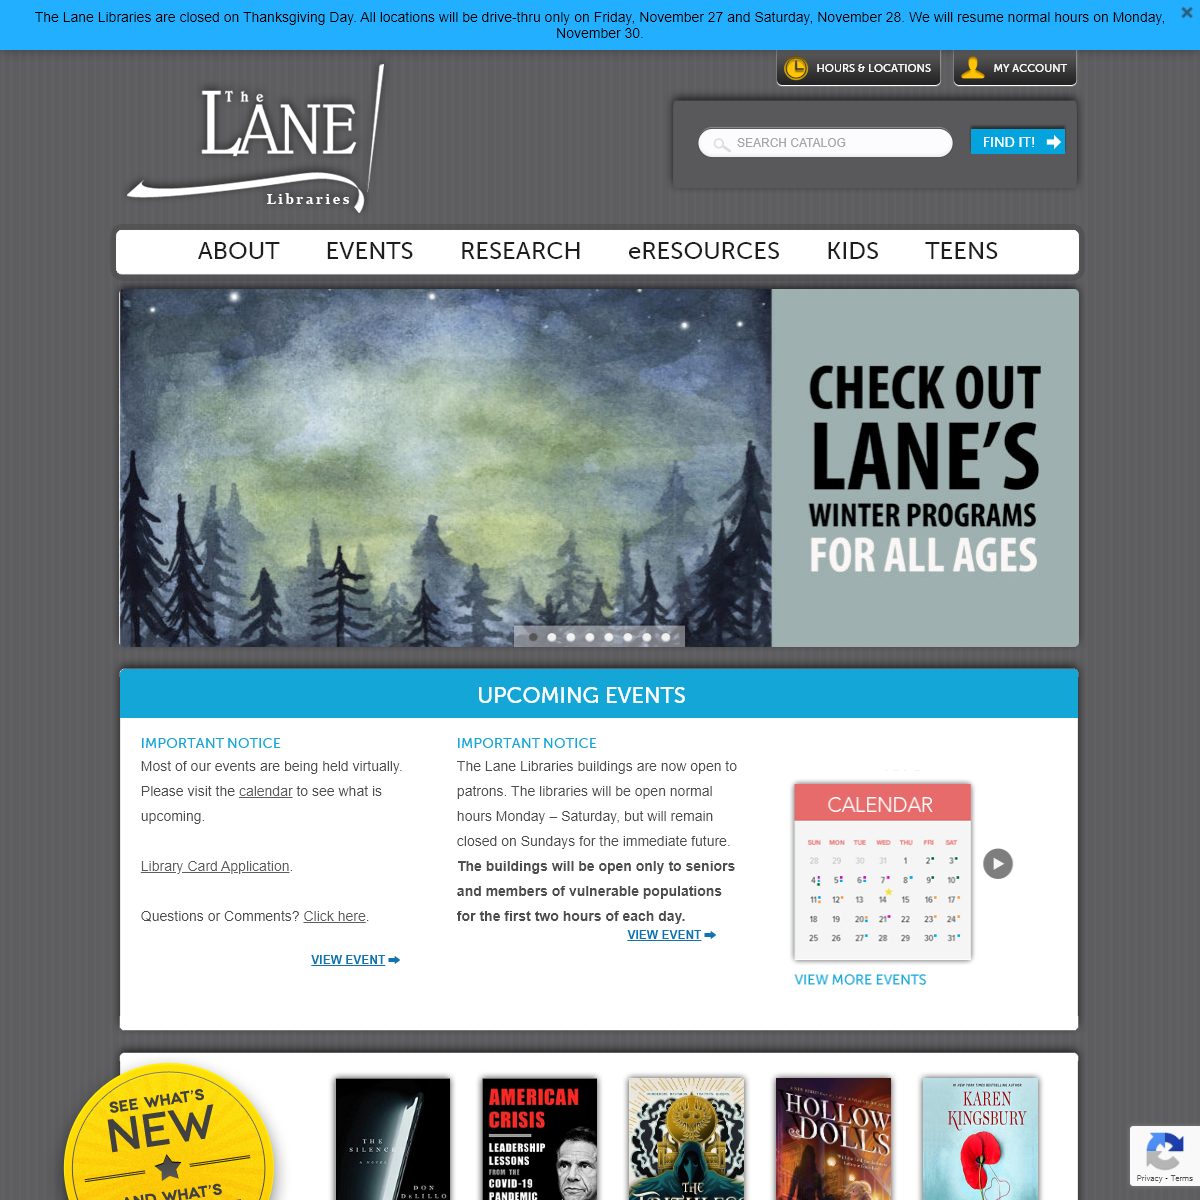 The Lane Libraries - Find it at the Lane!